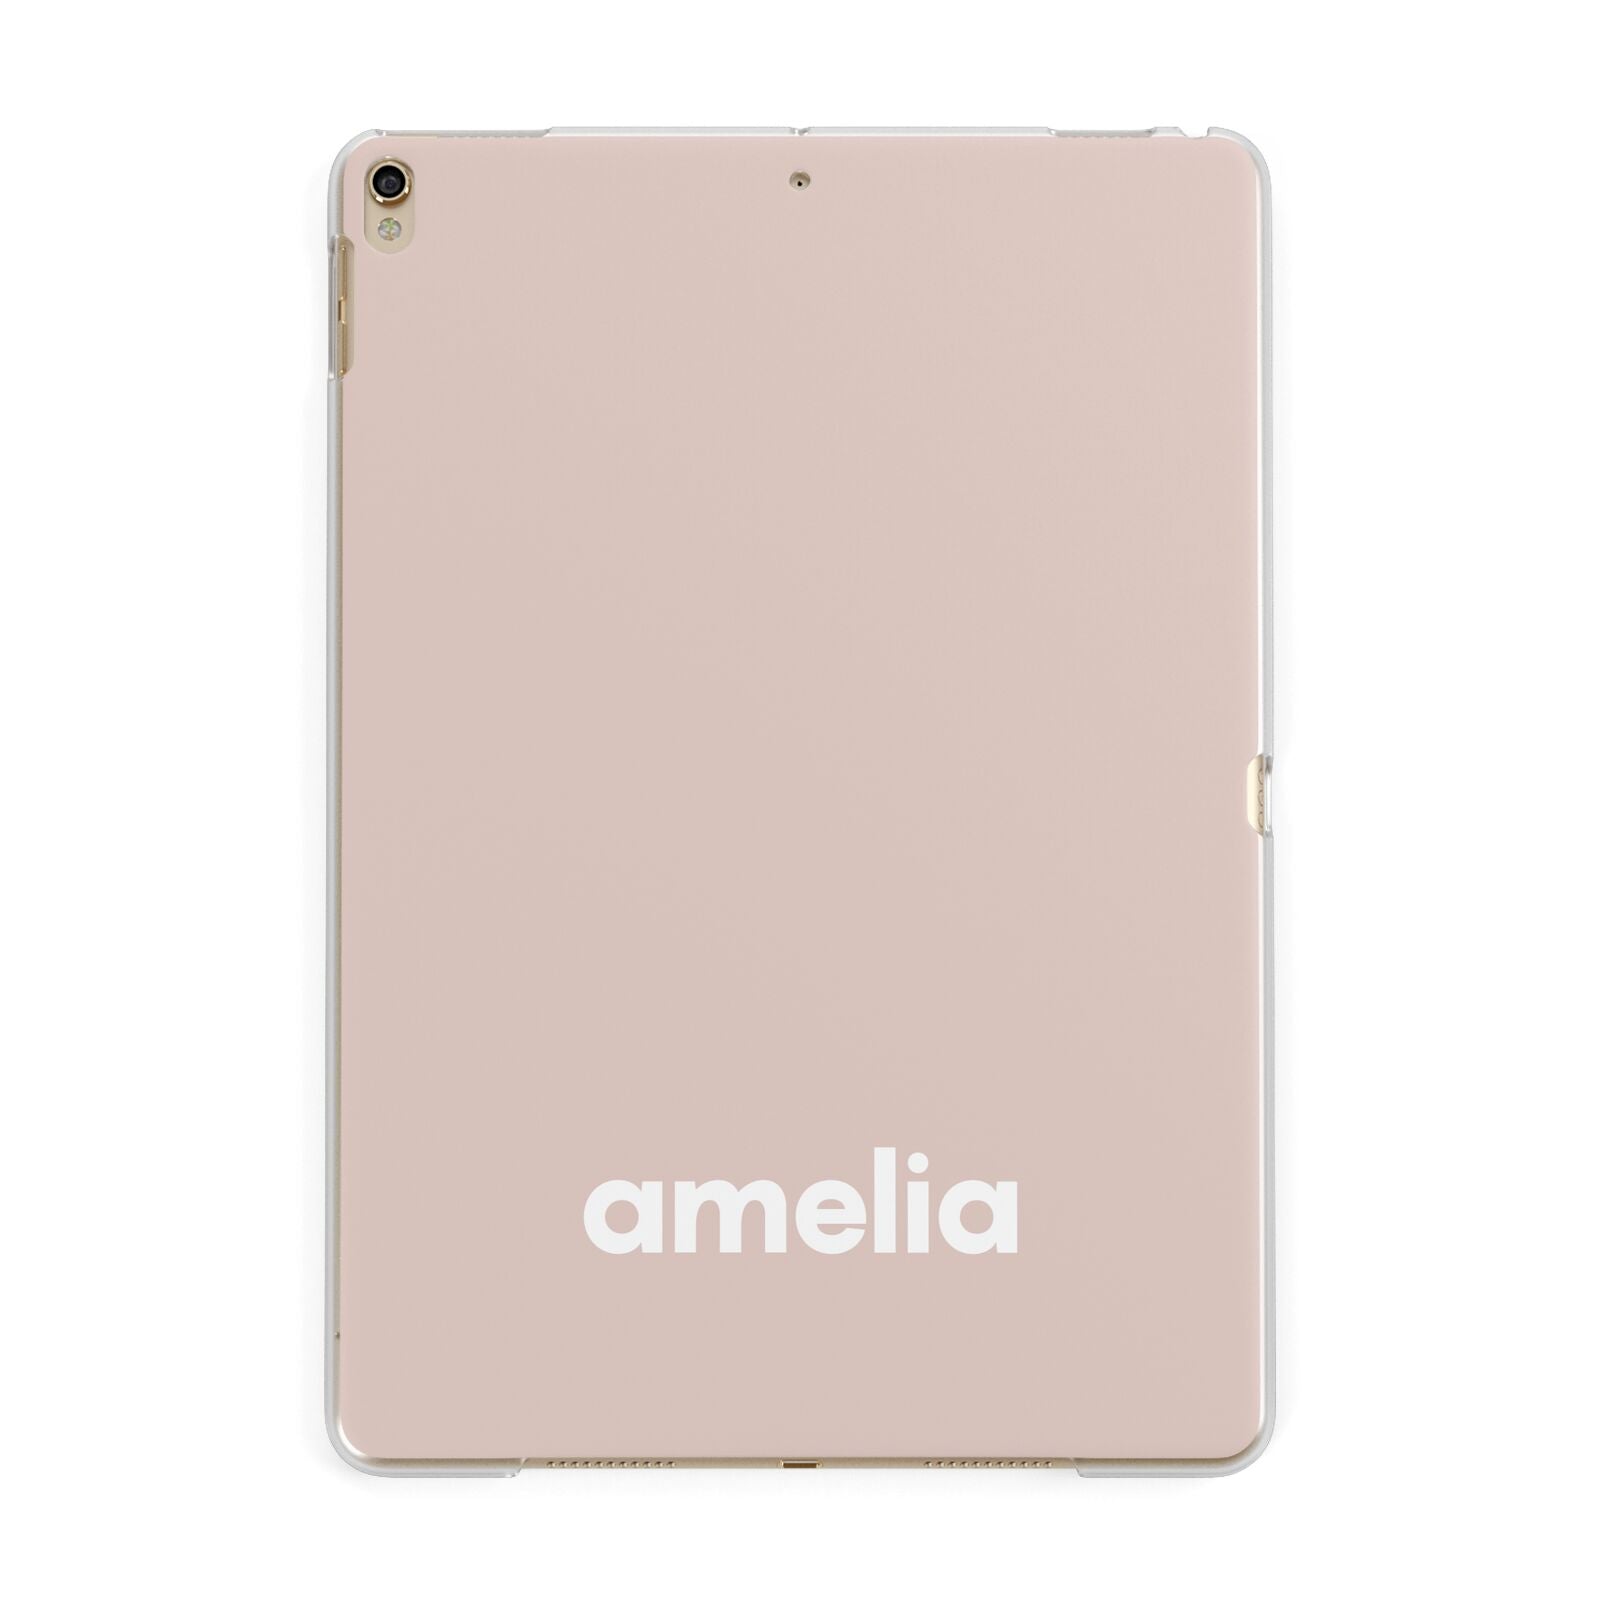 Simple Blush Pink with Name Apple iPad Gold Case